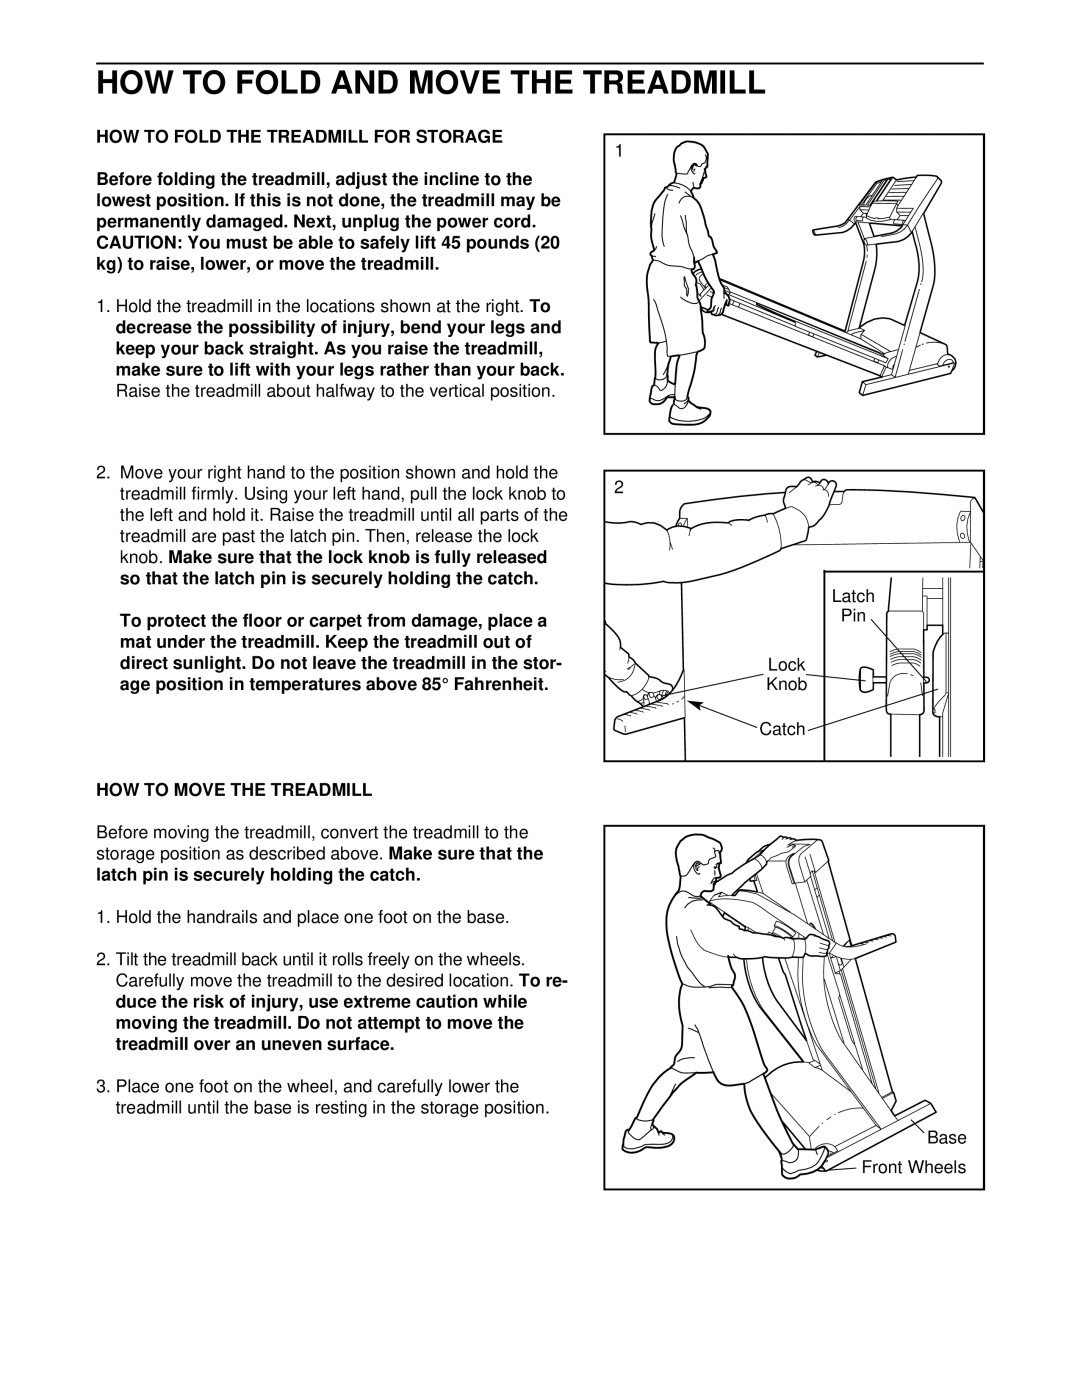 Healthrider HRTL14910 How To Fold And Move The Treadmill, How To Fold The Treadmill For Storage, How To Move The Treadmill 